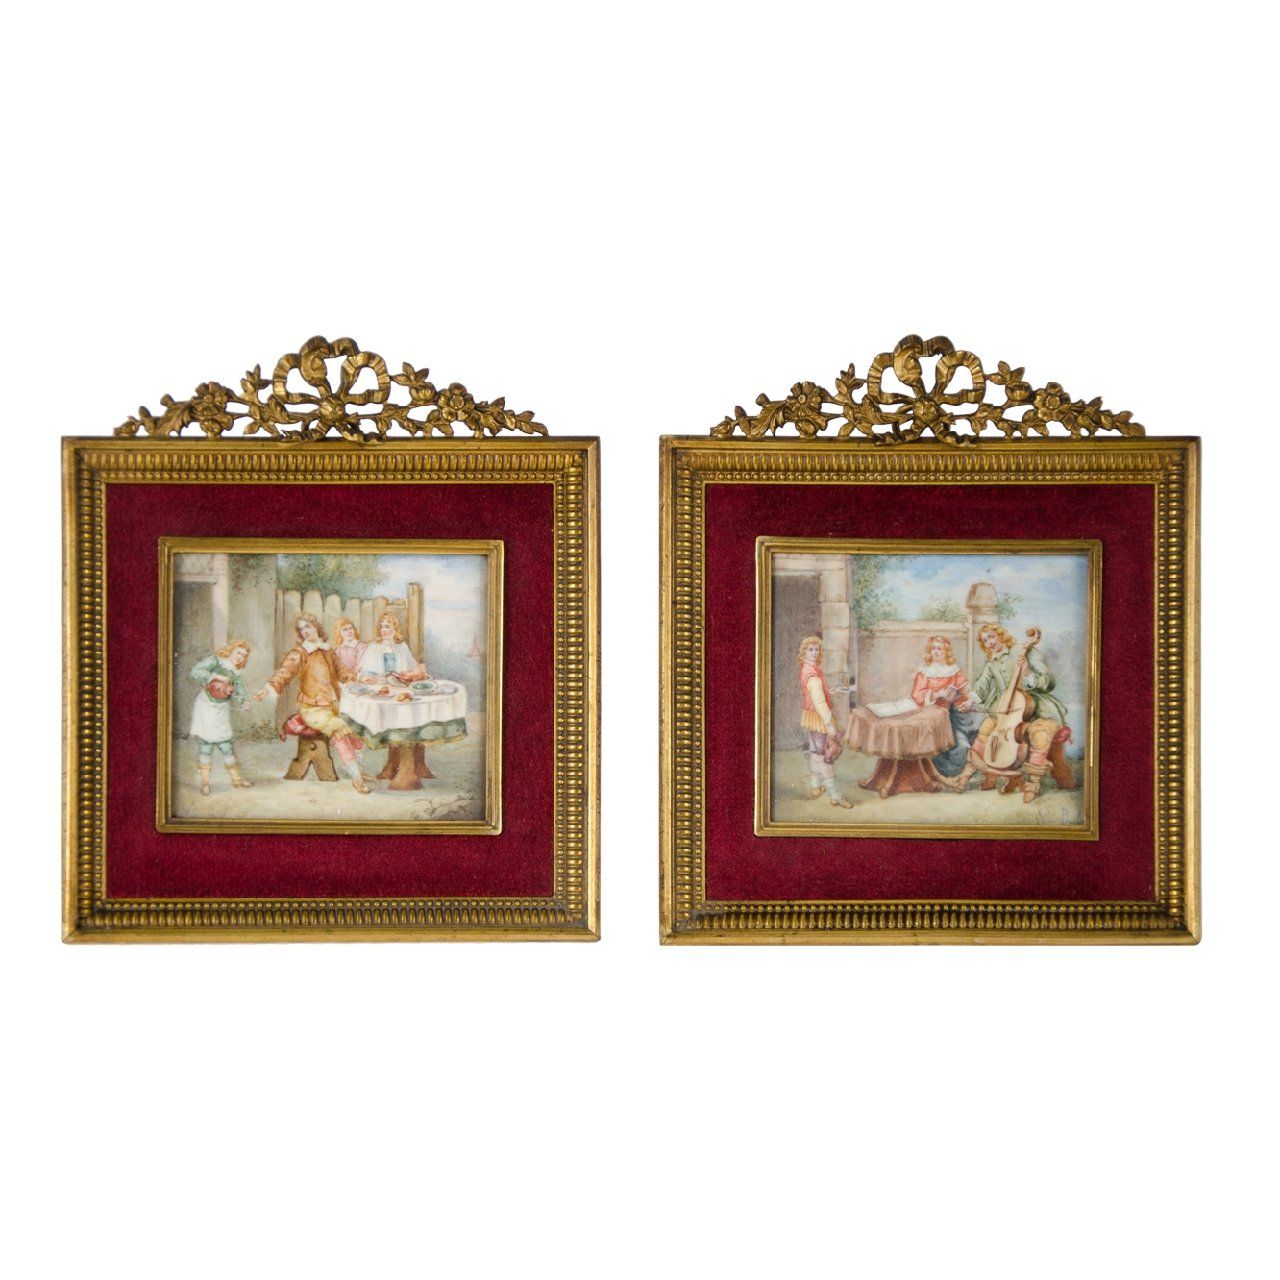 Pair of antique miniature paintings on ivory | Mayfair Gallery